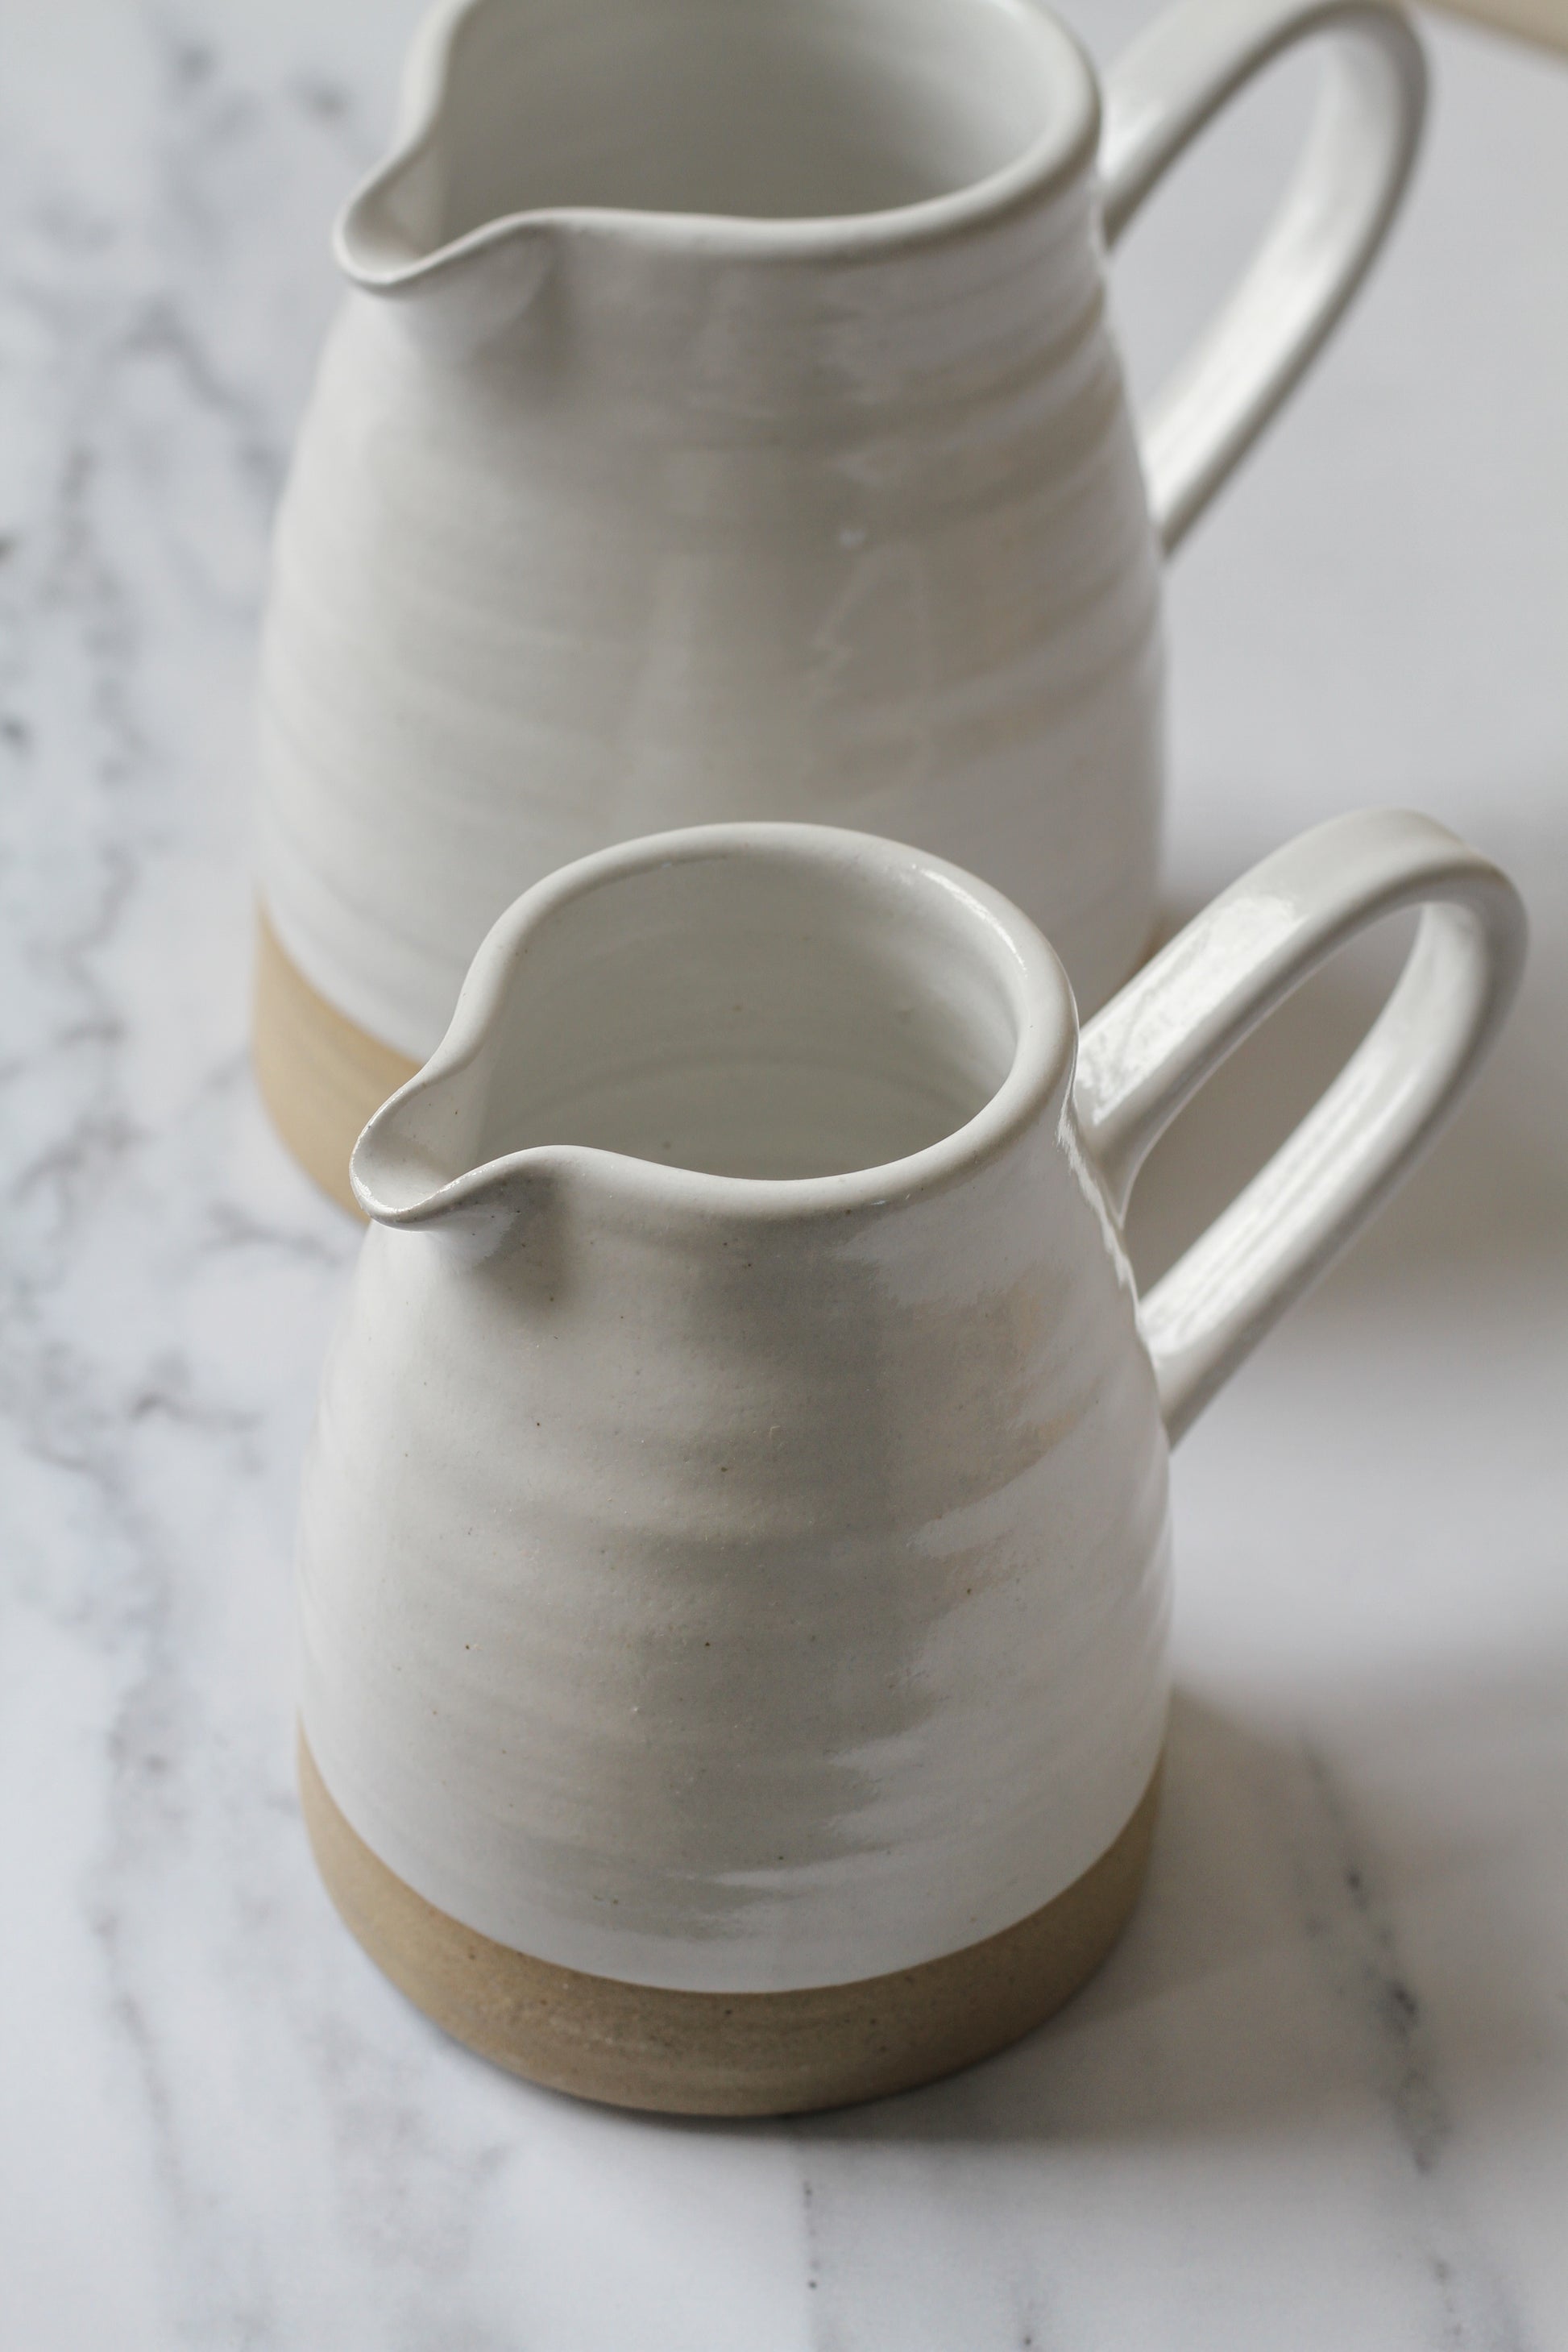 handmade stoneware jug with white glaze made in york by potter philip magson